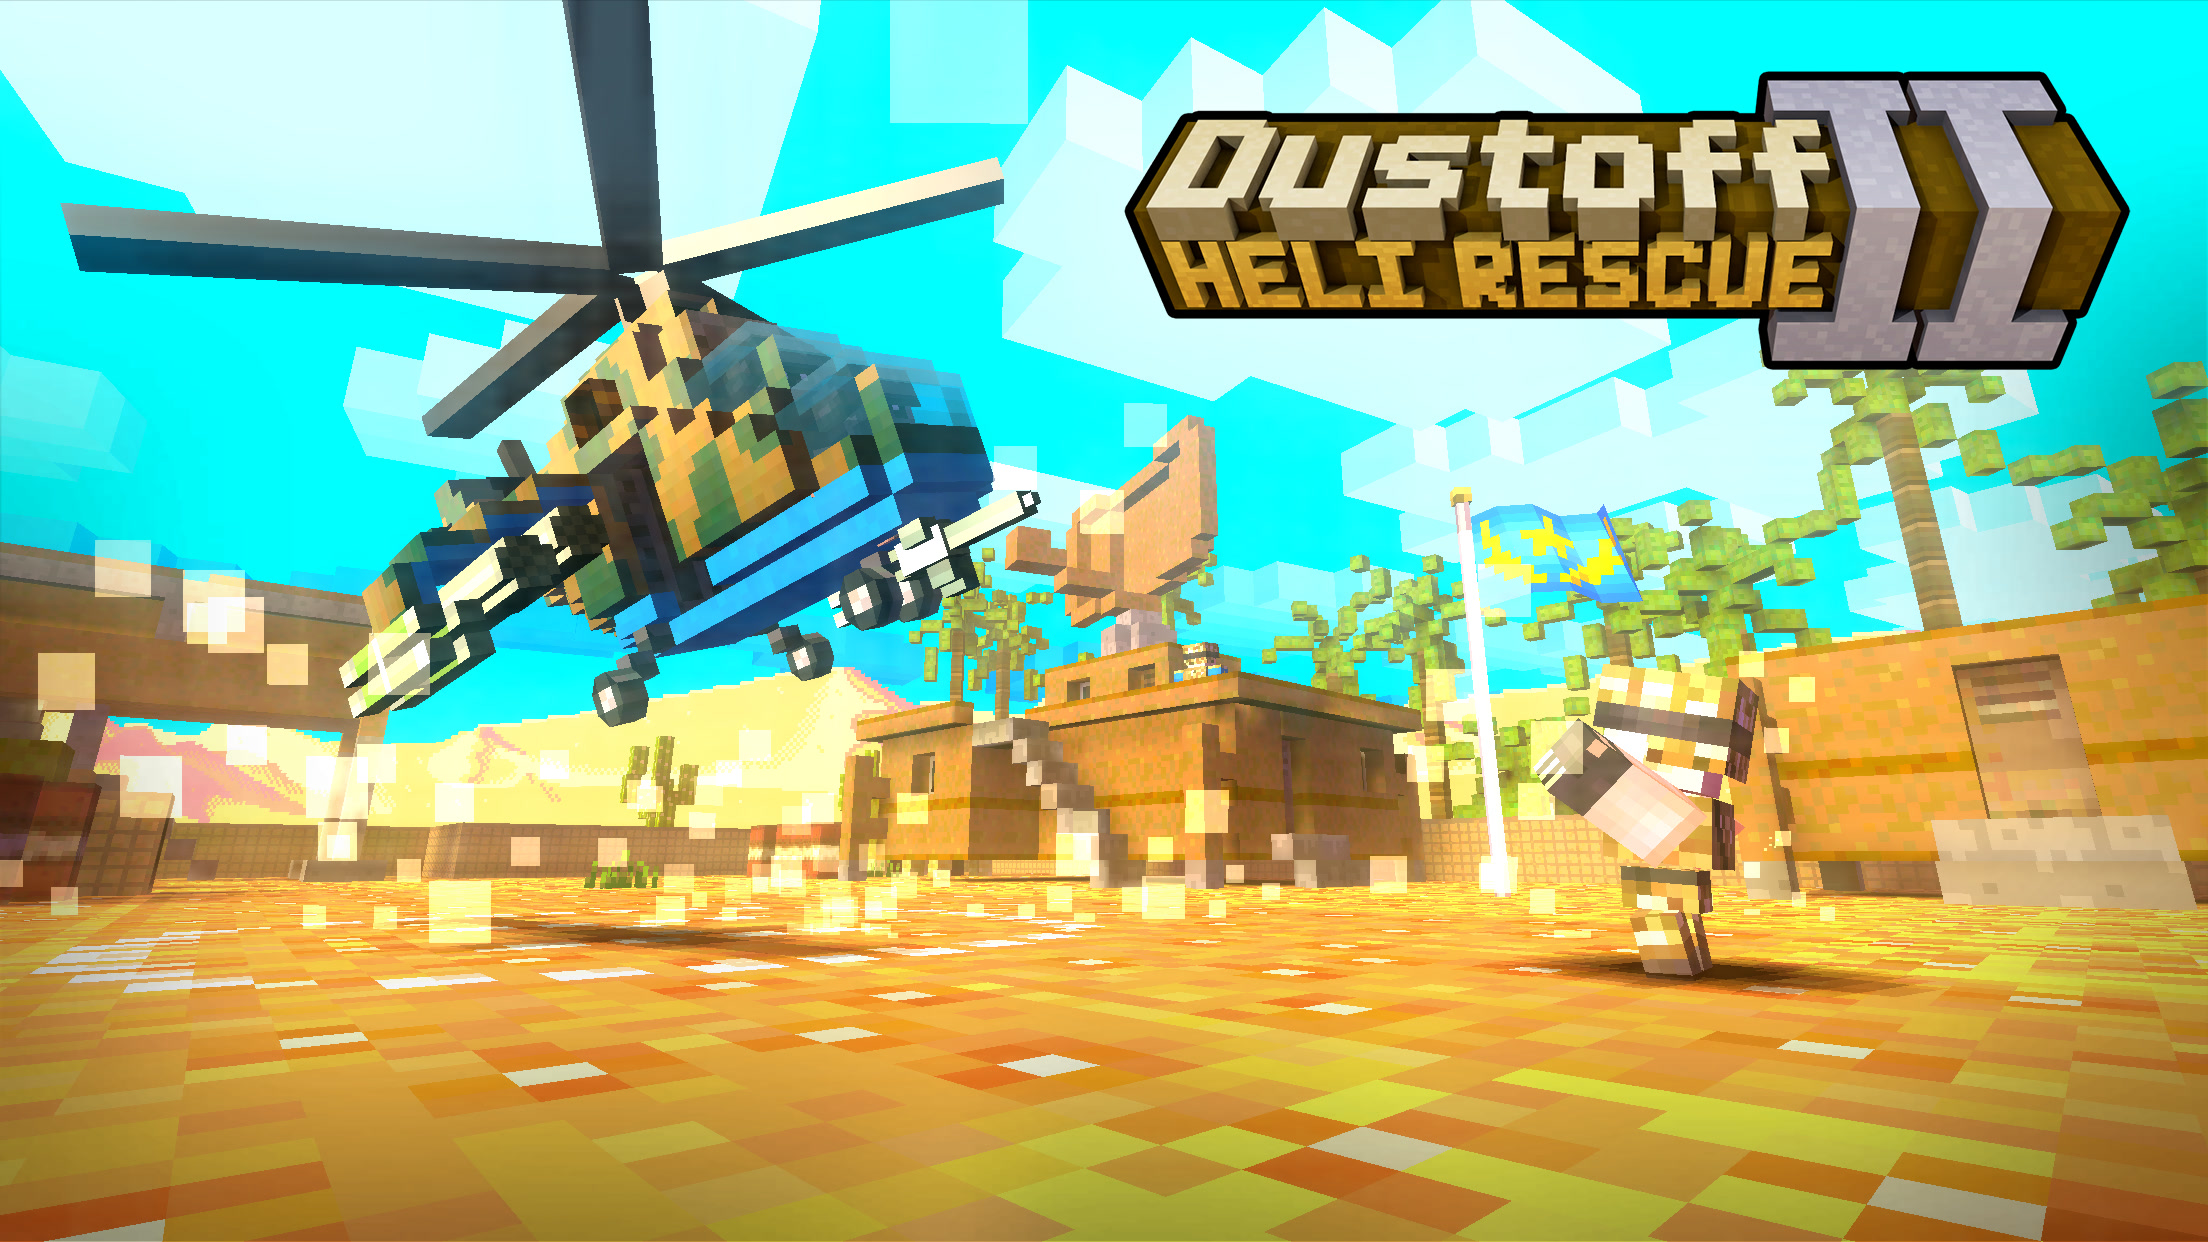 'Dustoff Heli Rescue 2' Looking for Beta Testers